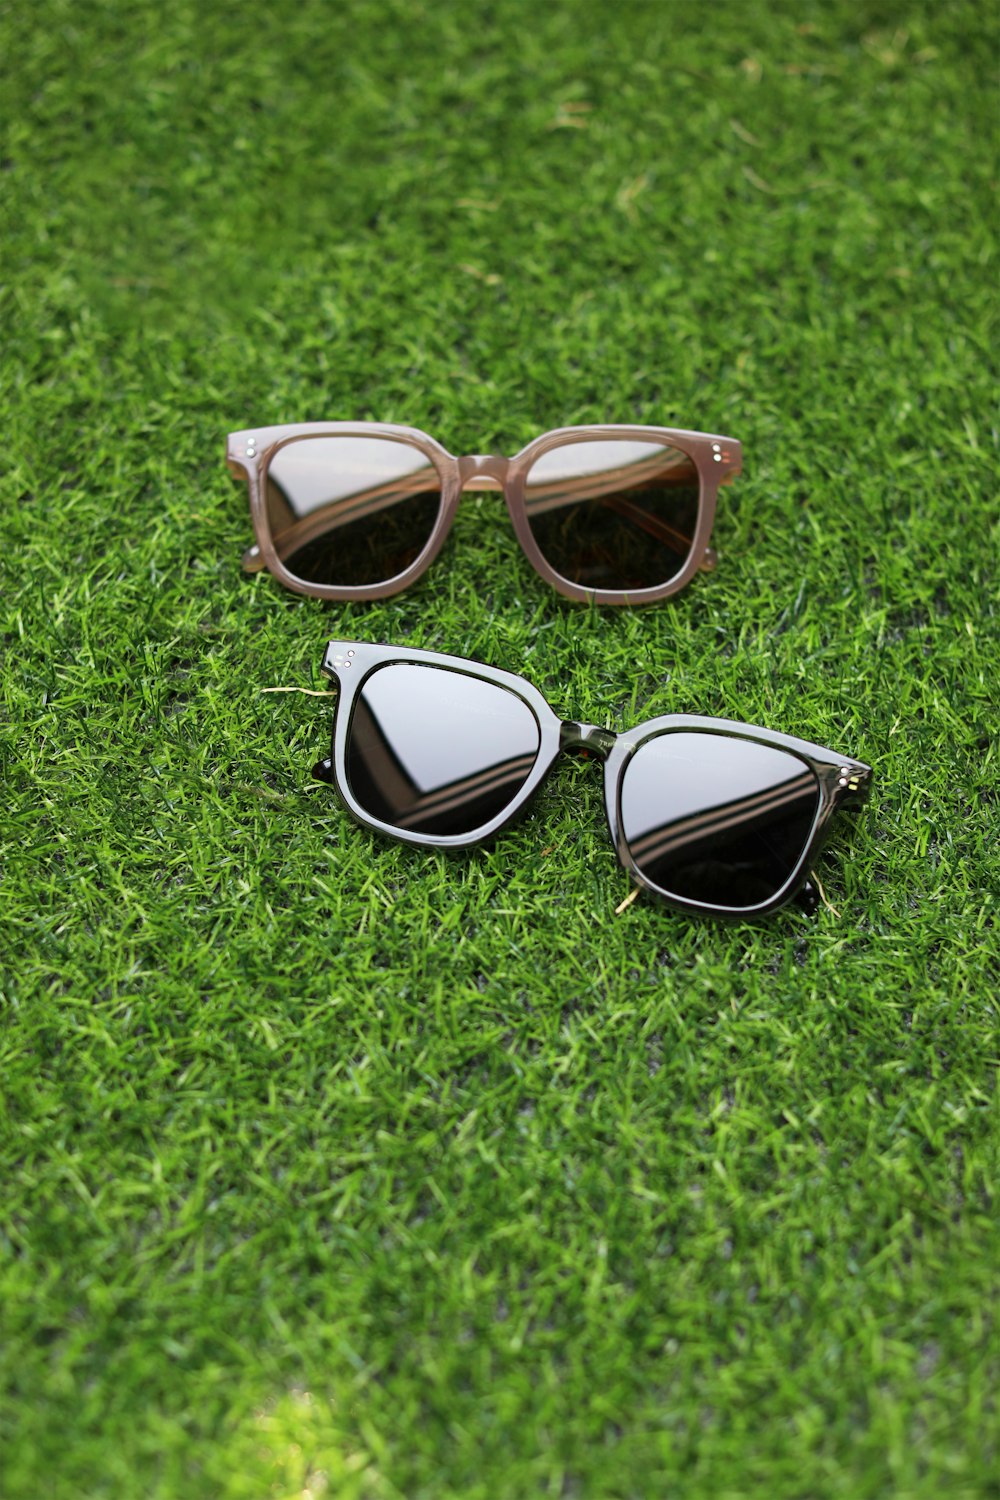 three pairs of sunglasses laying on the grass